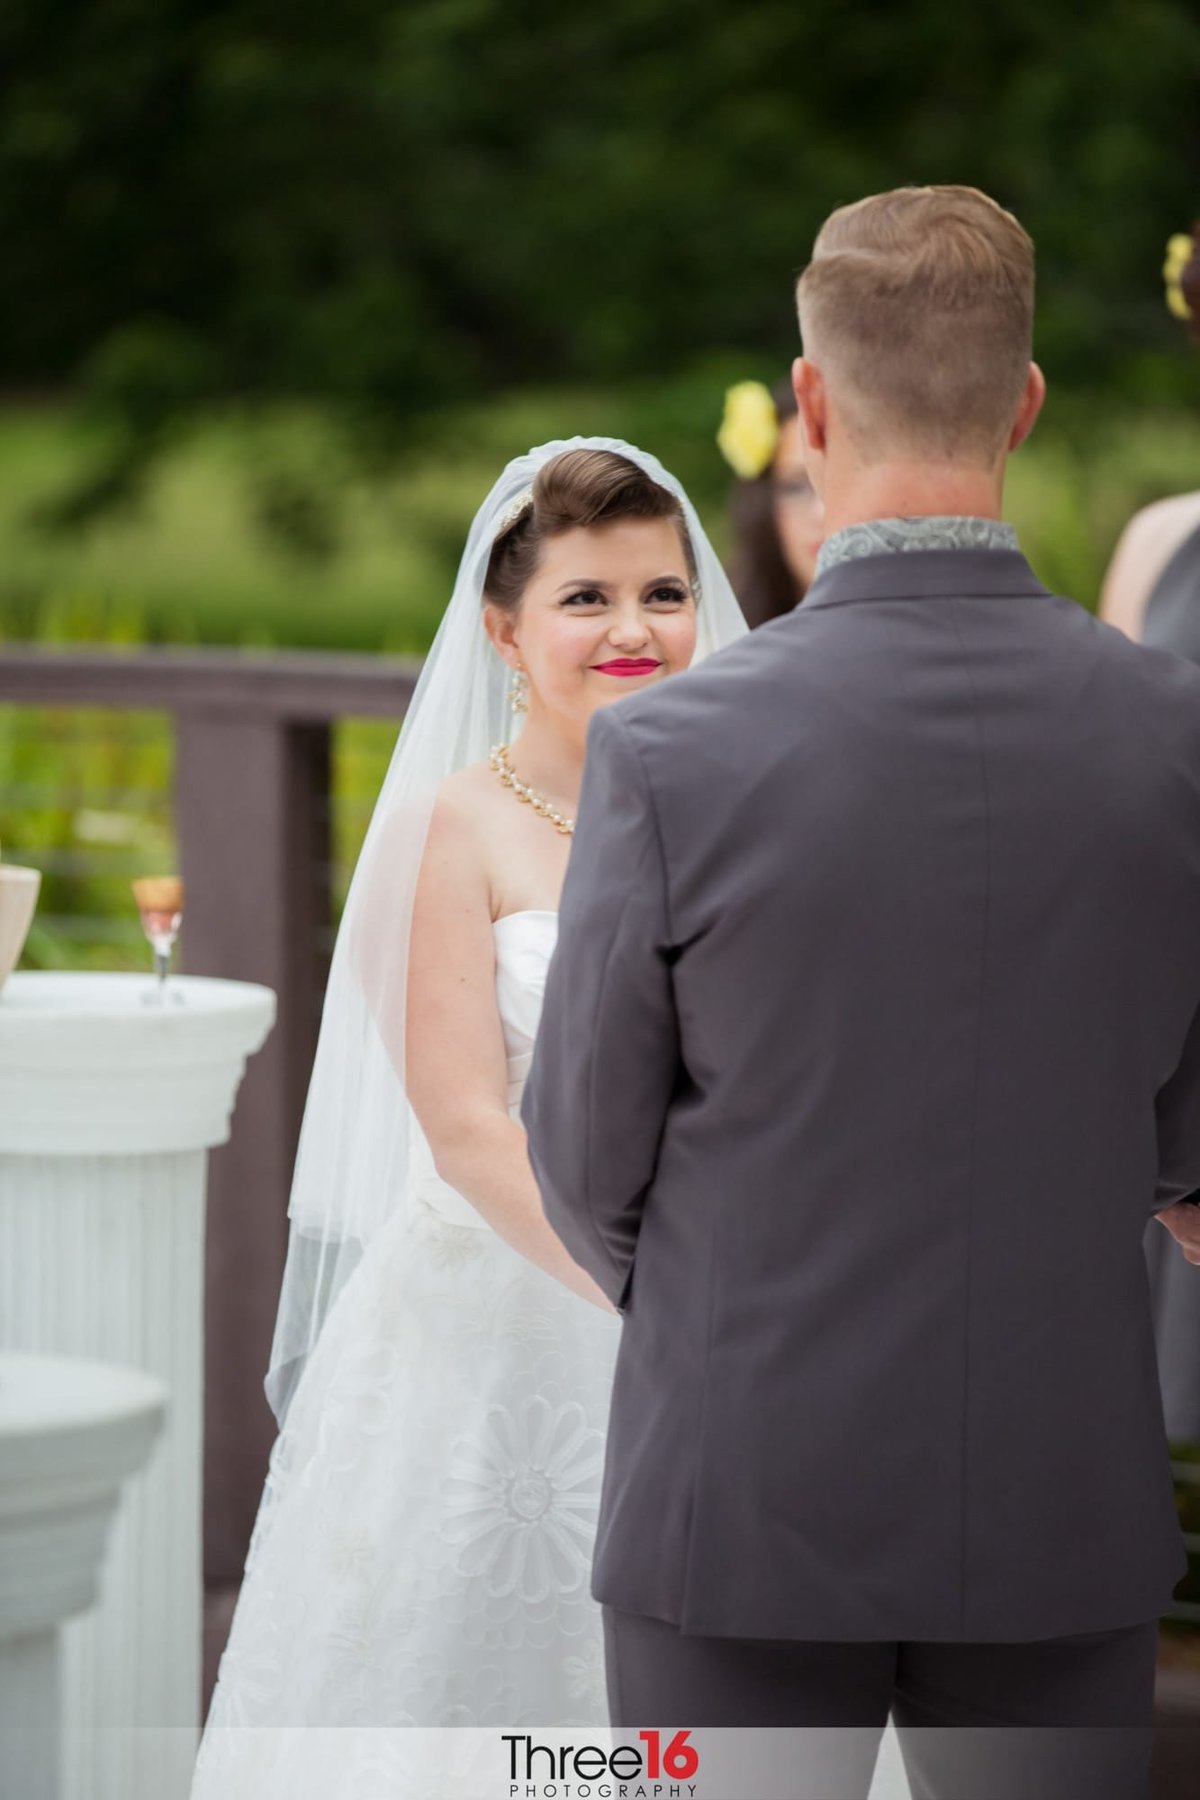 Bride looks at her Groom during the wedding ceremony and smiles